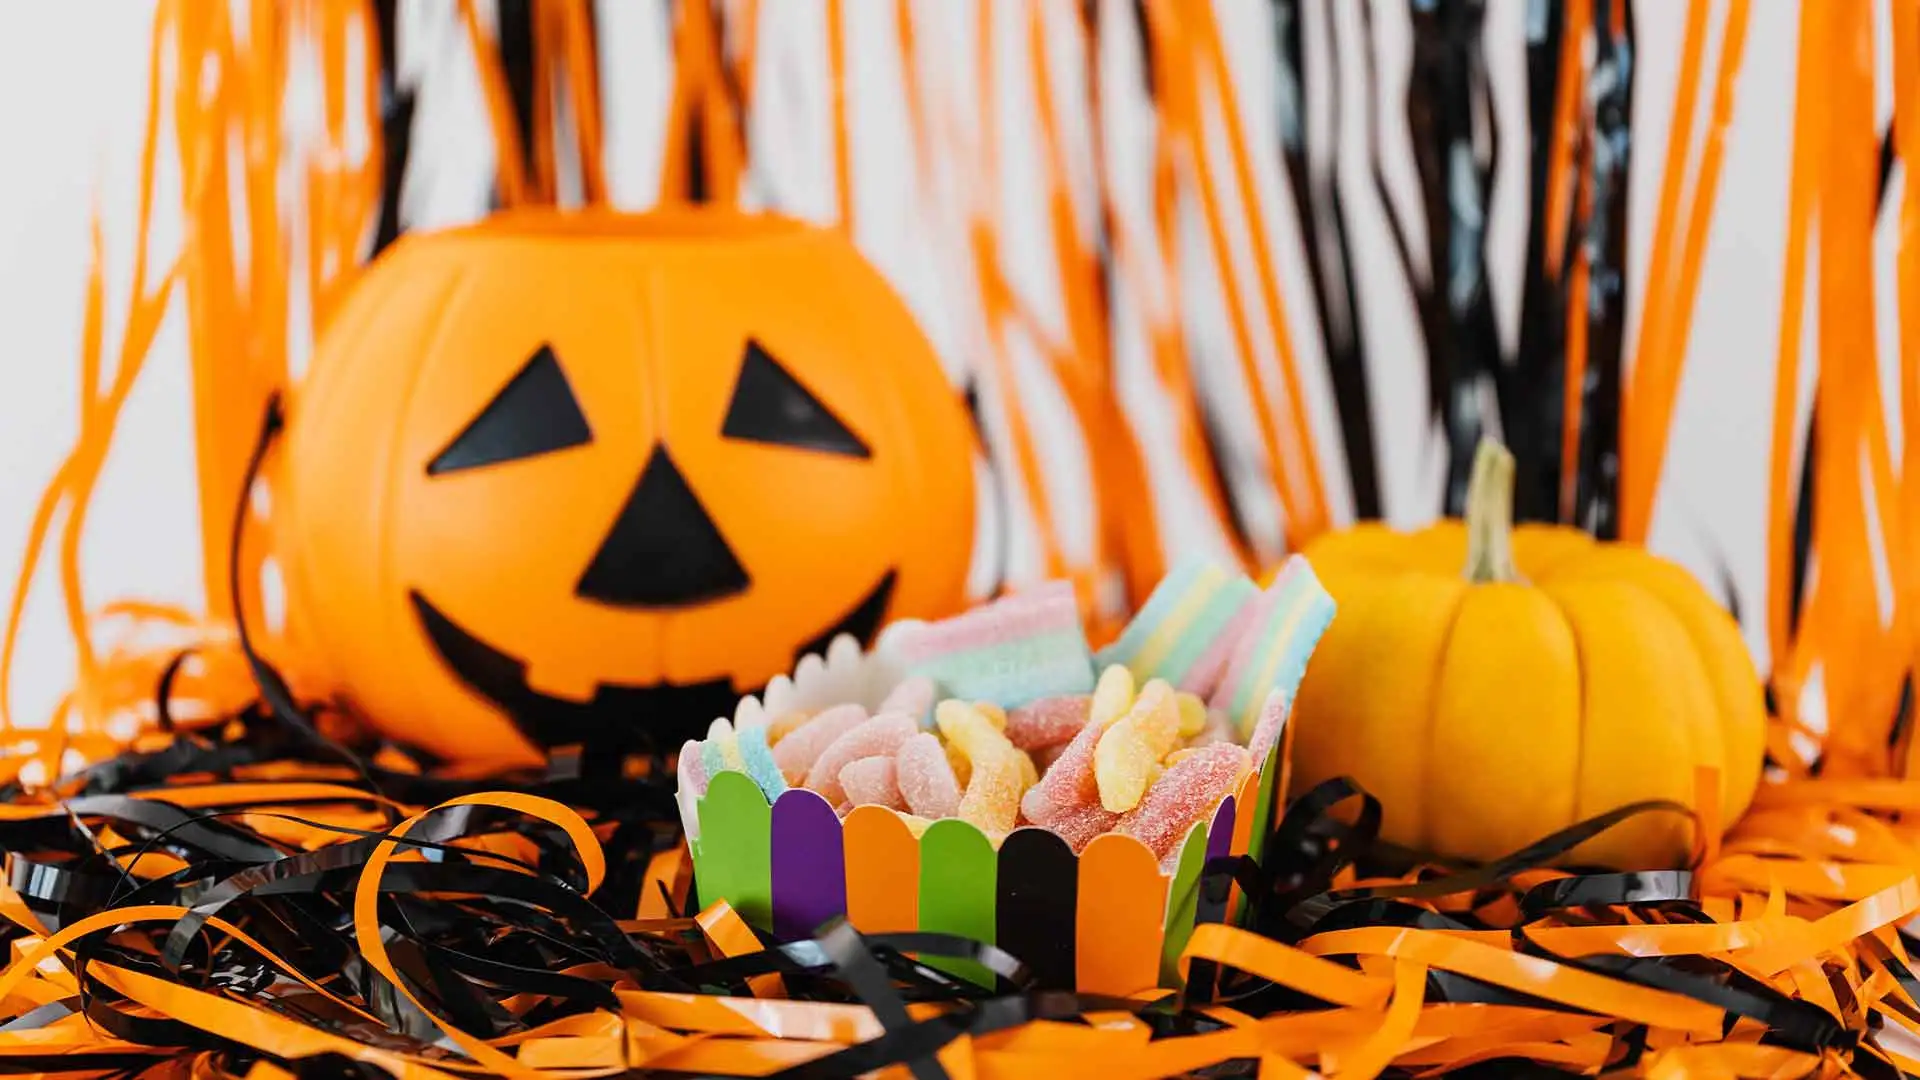 Happy Halloween! A glimpse of spooky celebrations around the world